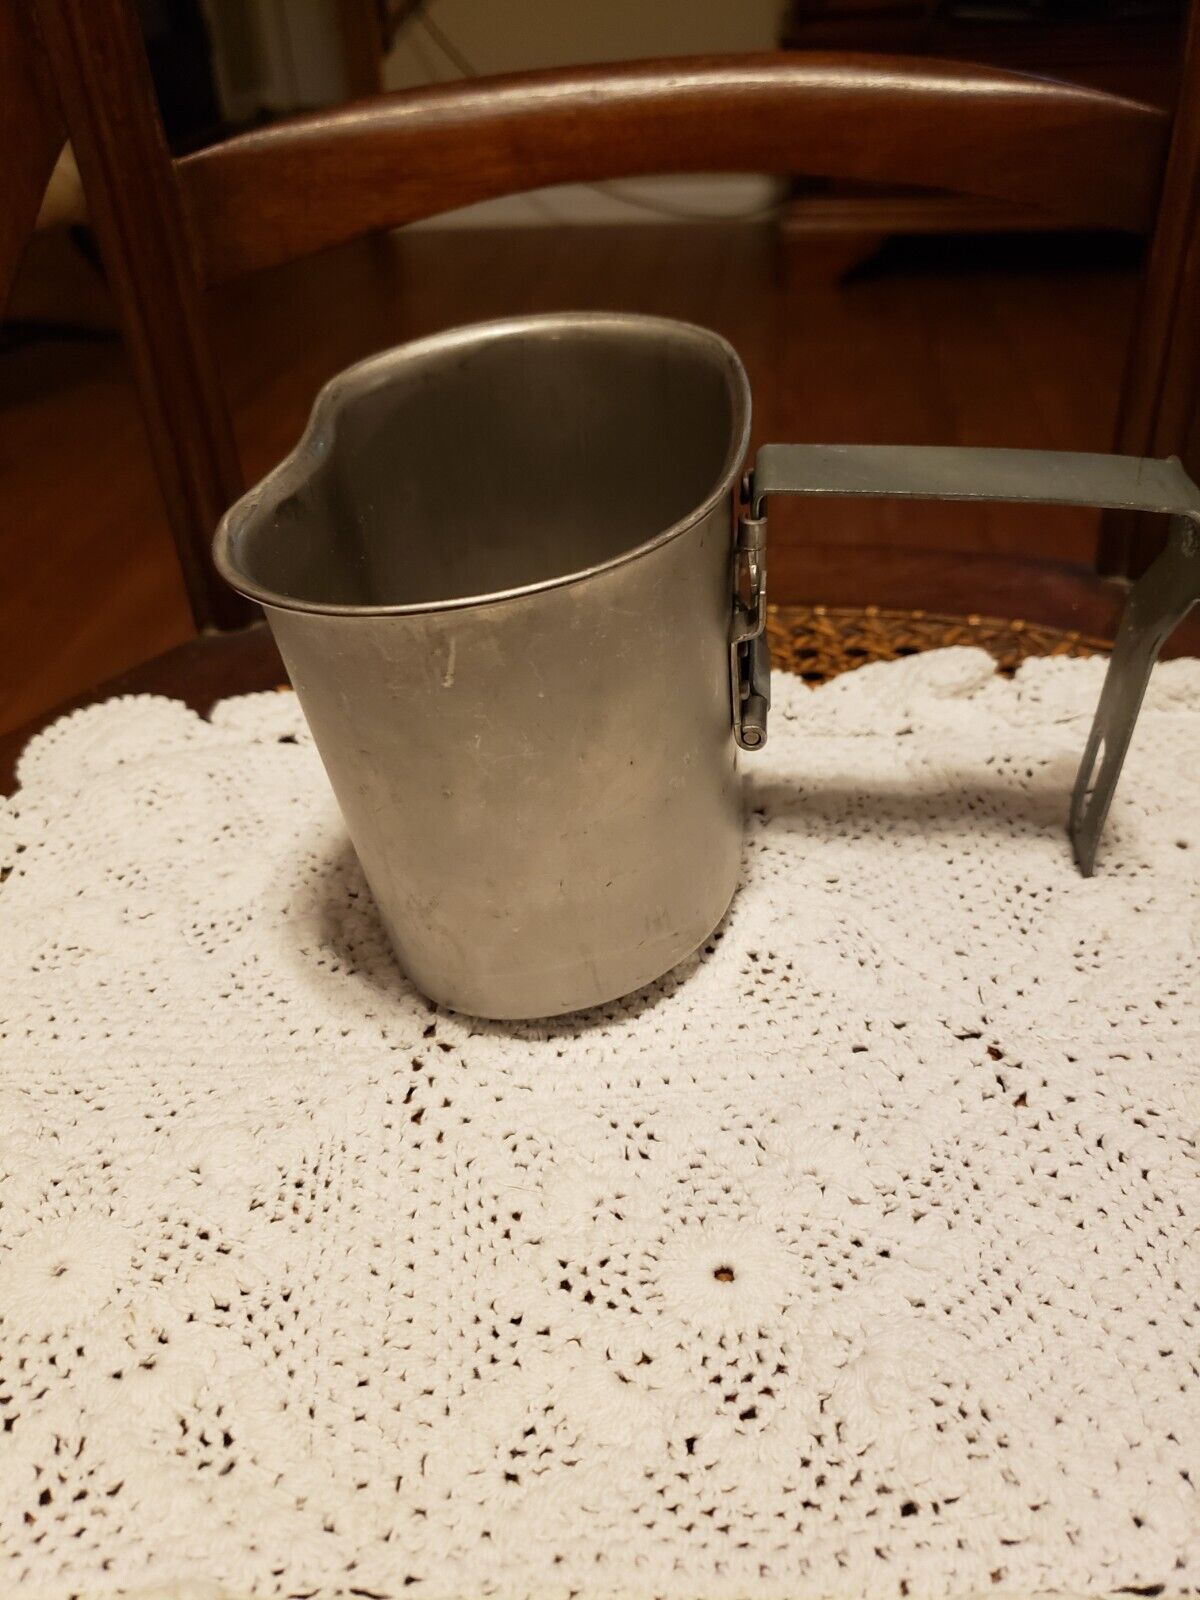 1942-45 M-1910 US MILITARY CANTEEN CUP ORIGINAL Stainless Steel Collette